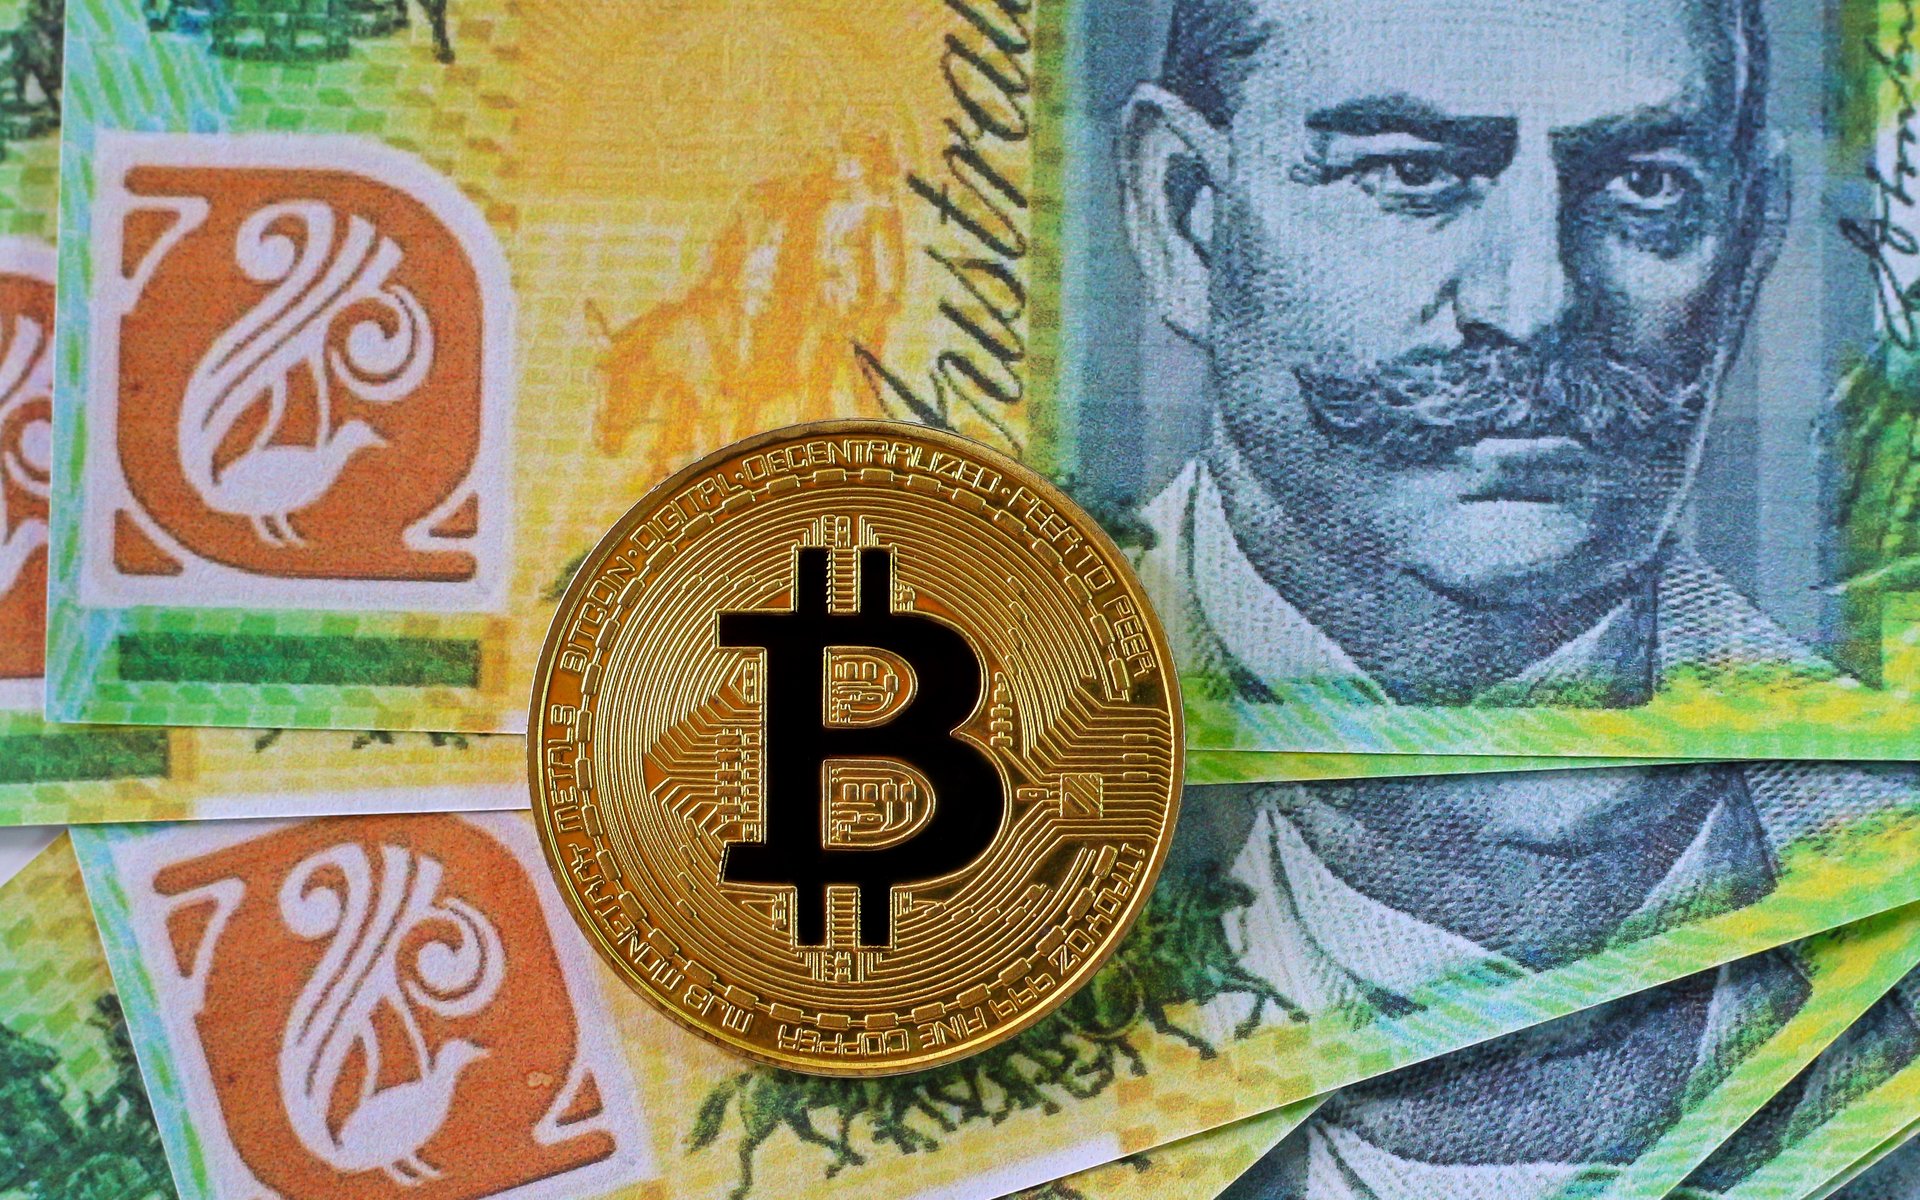 All Australians Can Now Pay Their Bills With Bitcoin